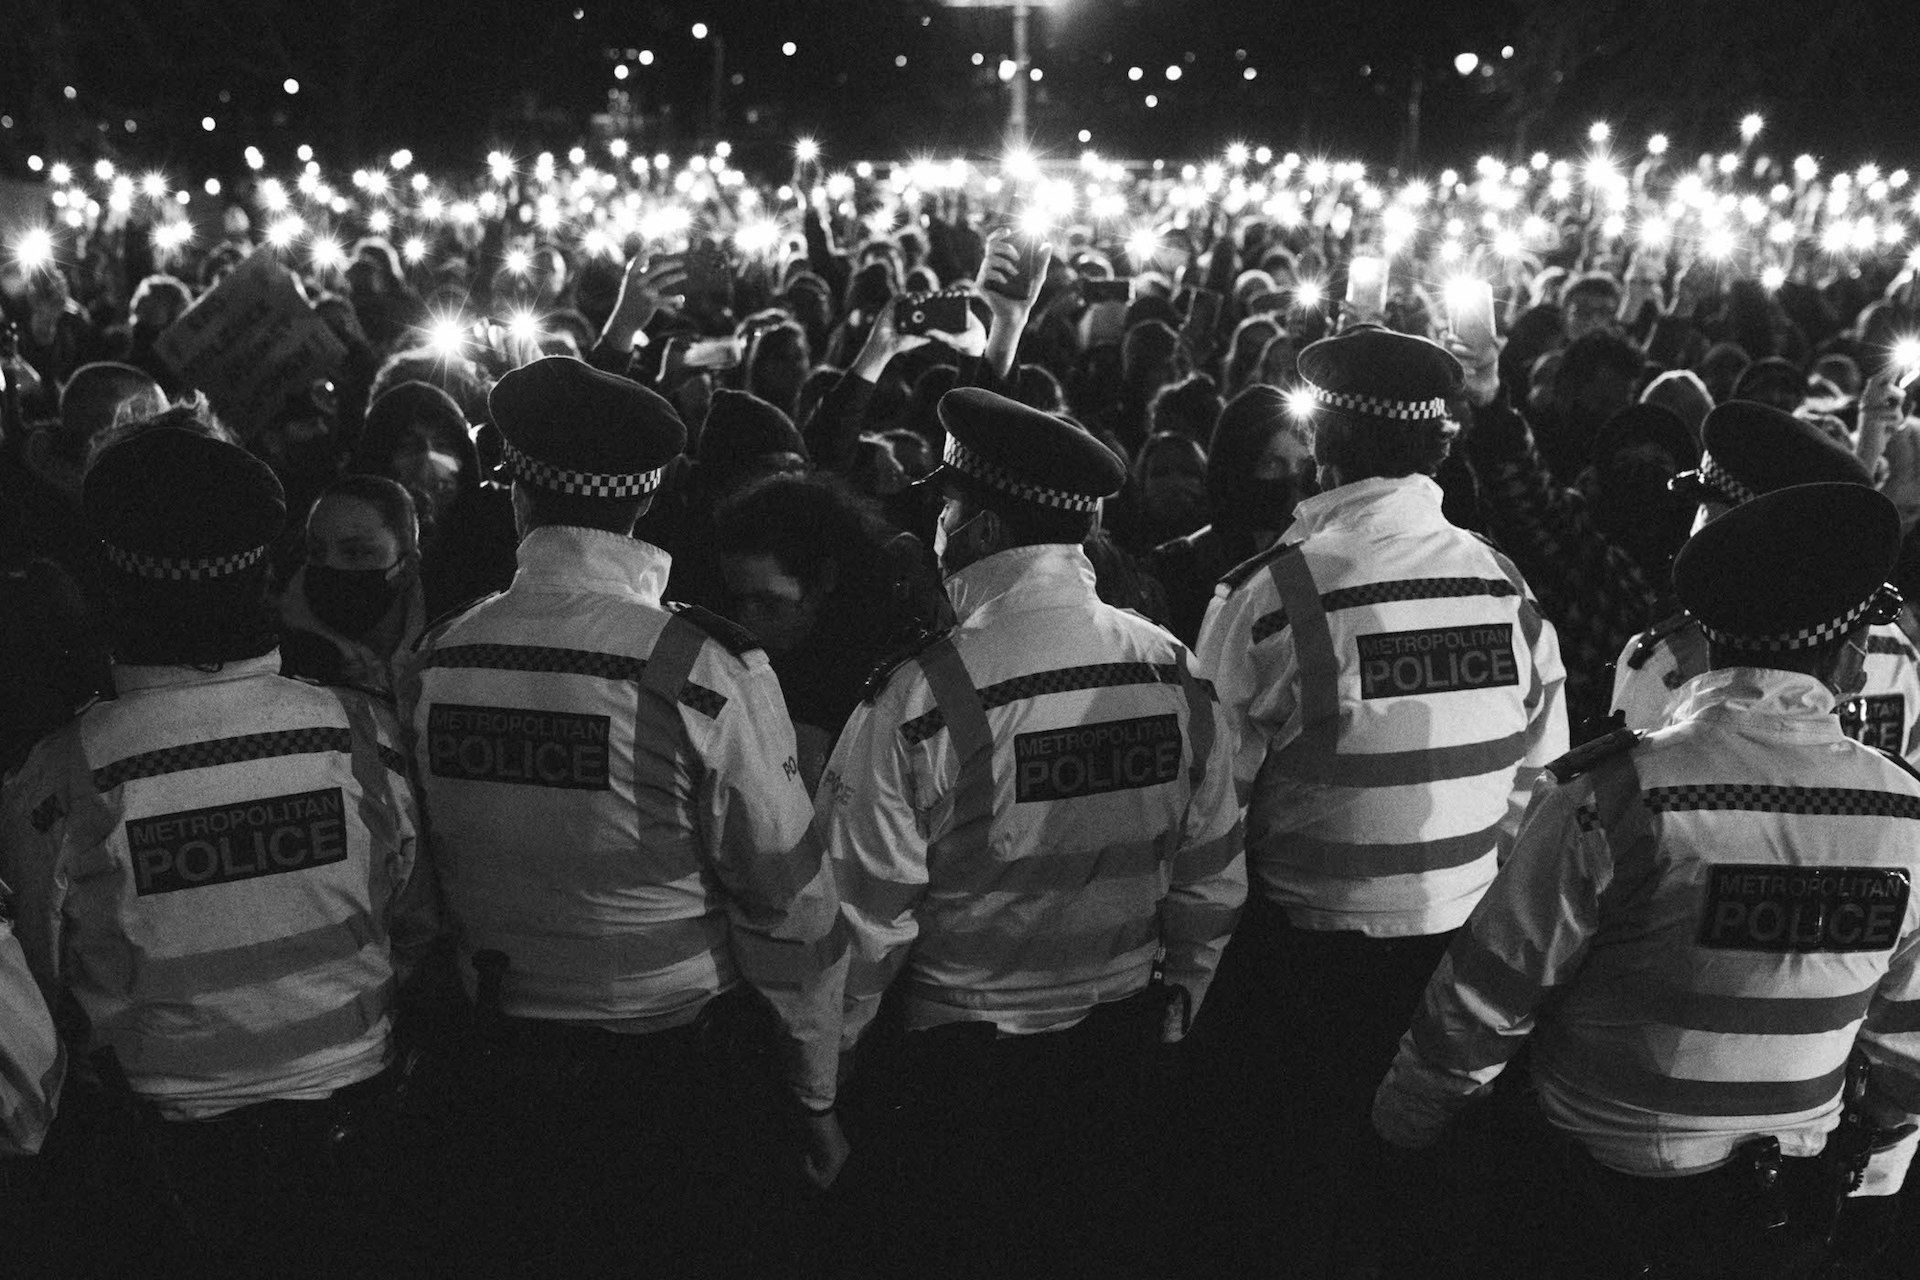 Power of protest: The policing bill has been delayed